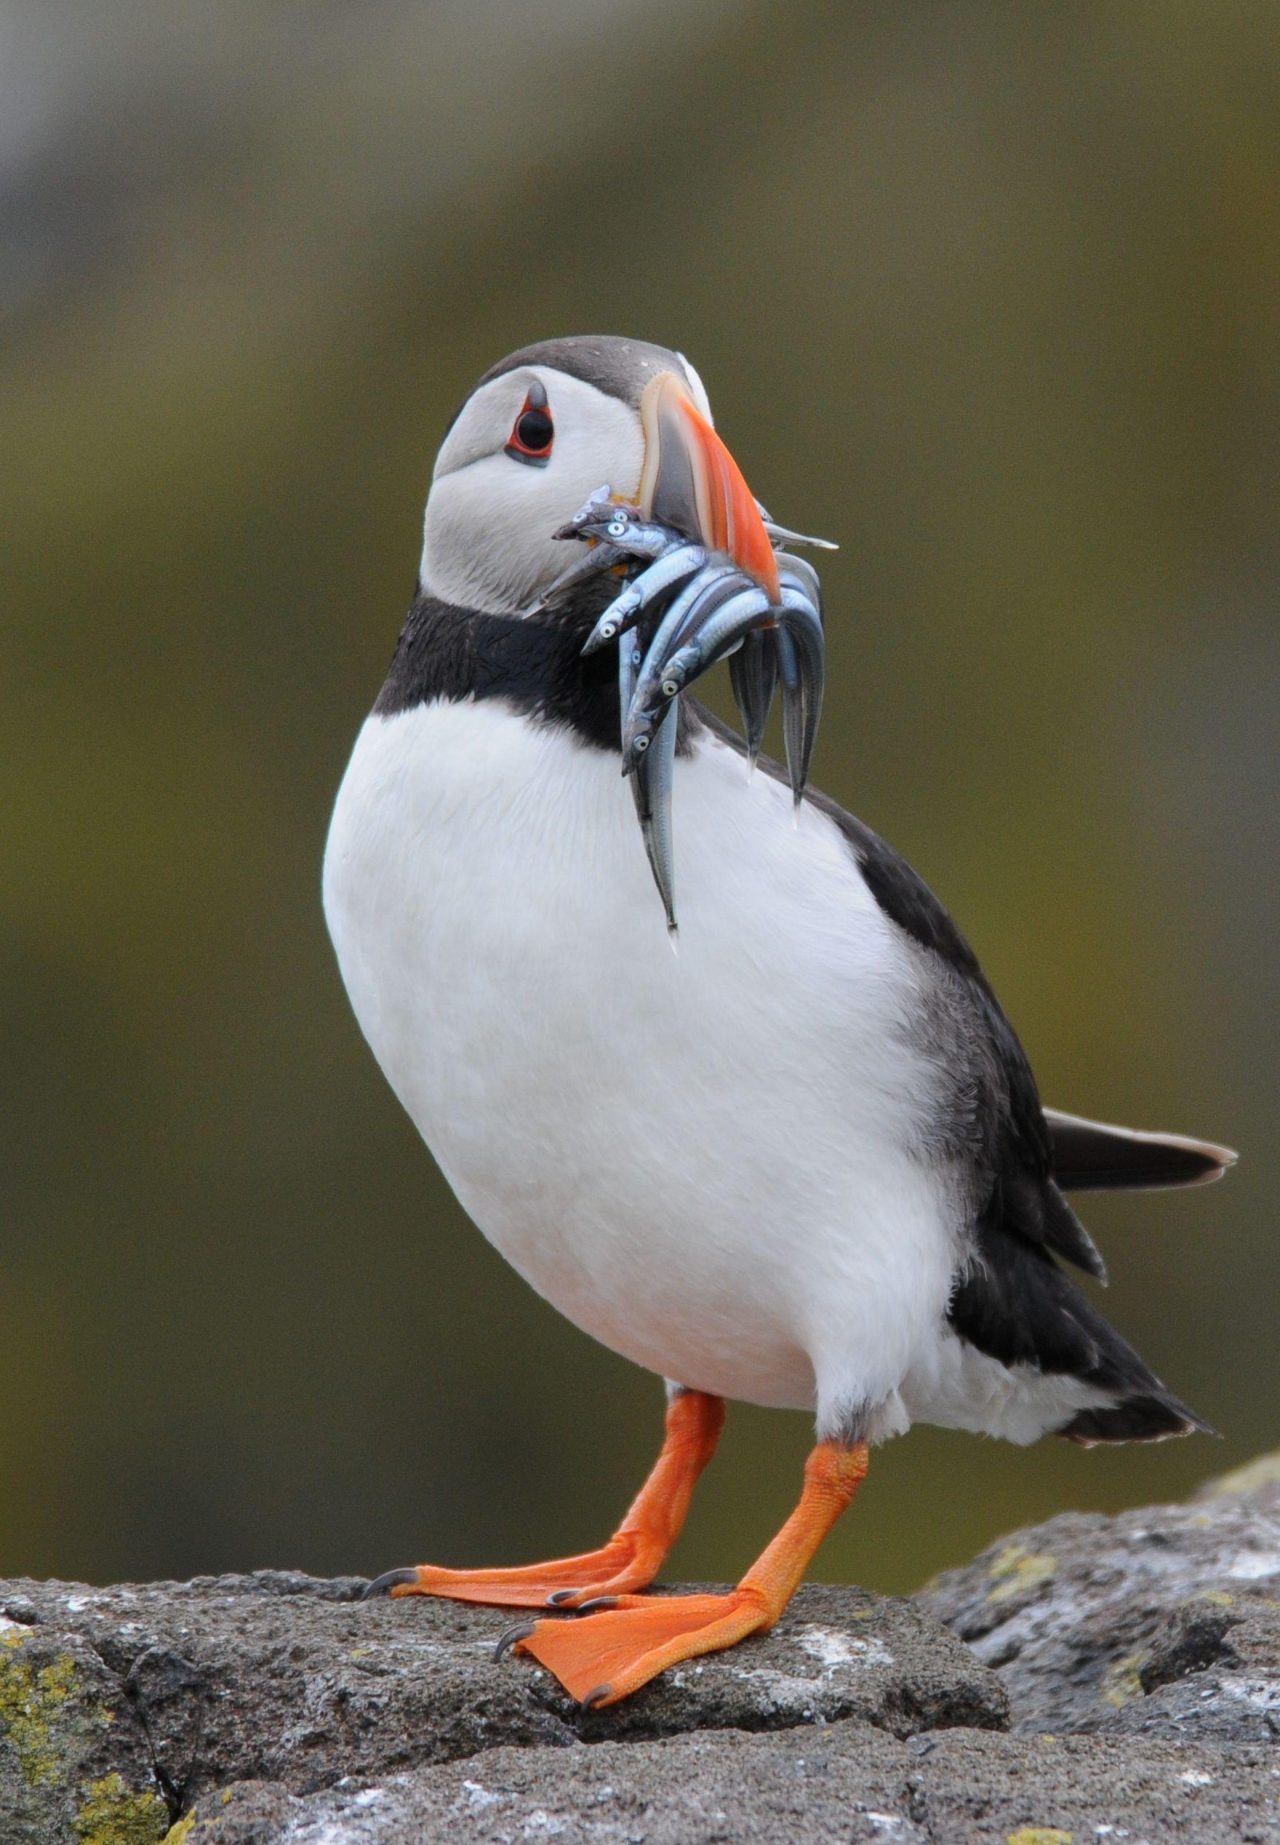 A photo of a puffin standing on a rock with fish in its mouth